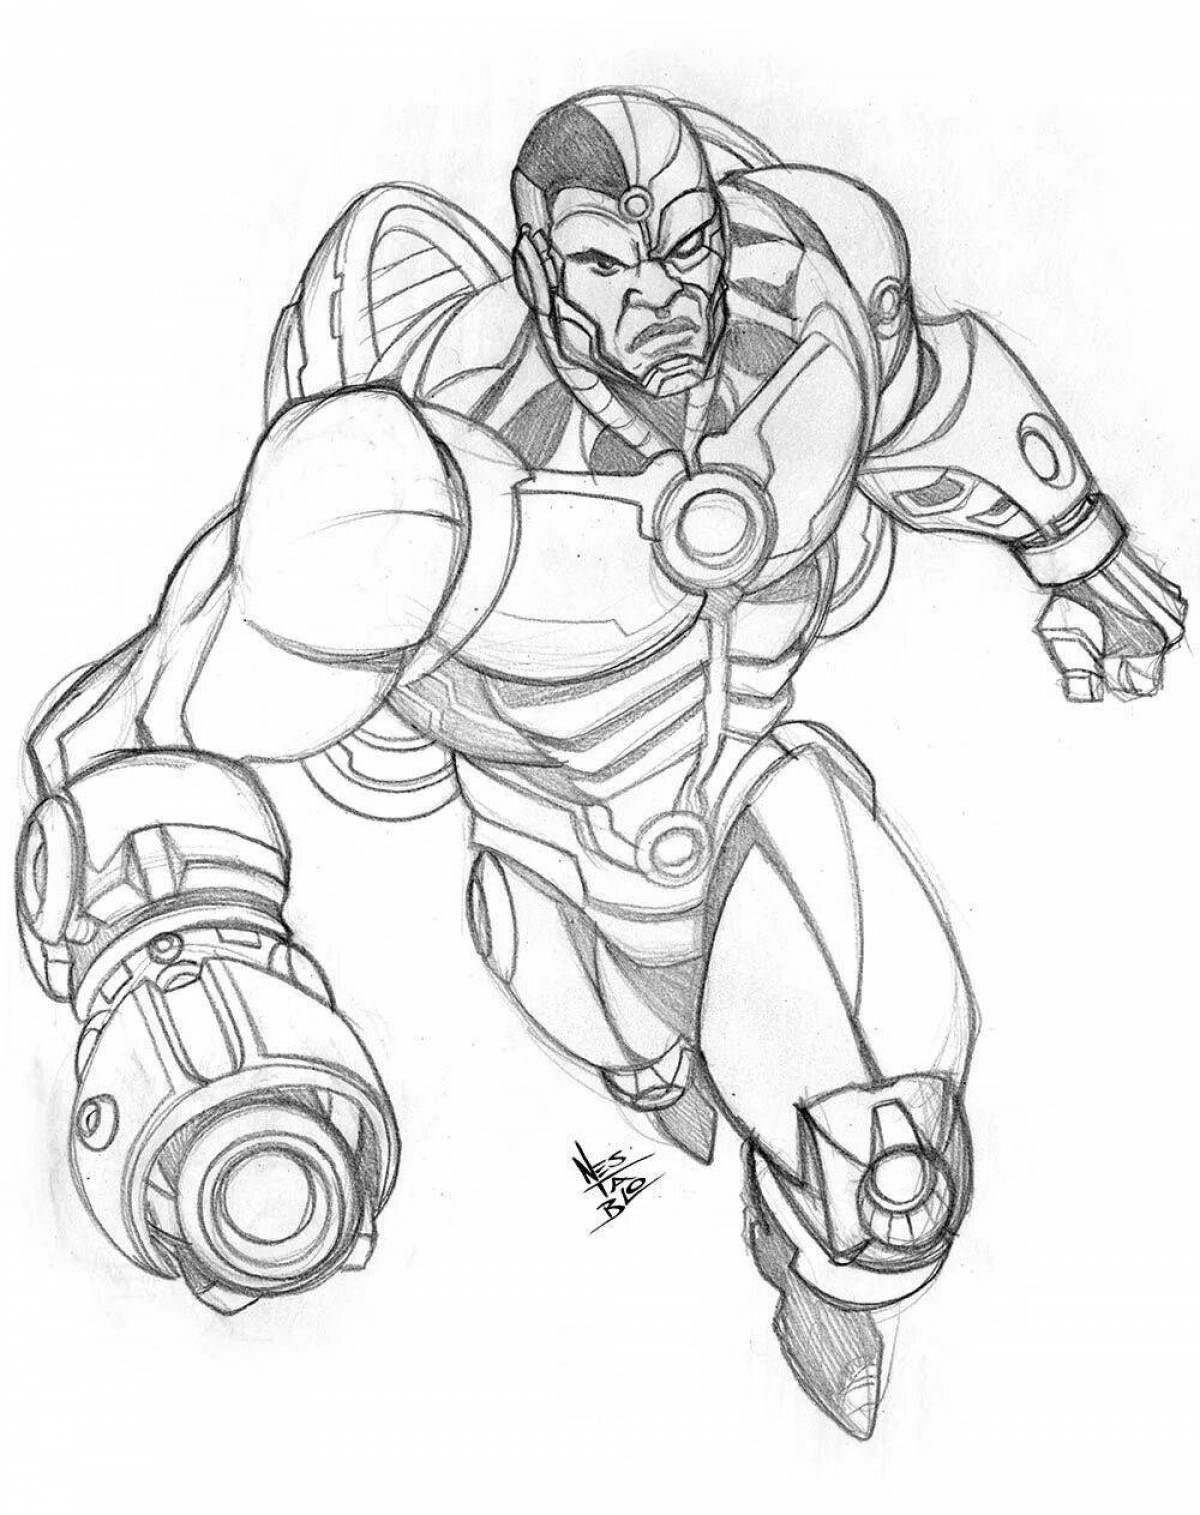 Charming cyborg coloring page